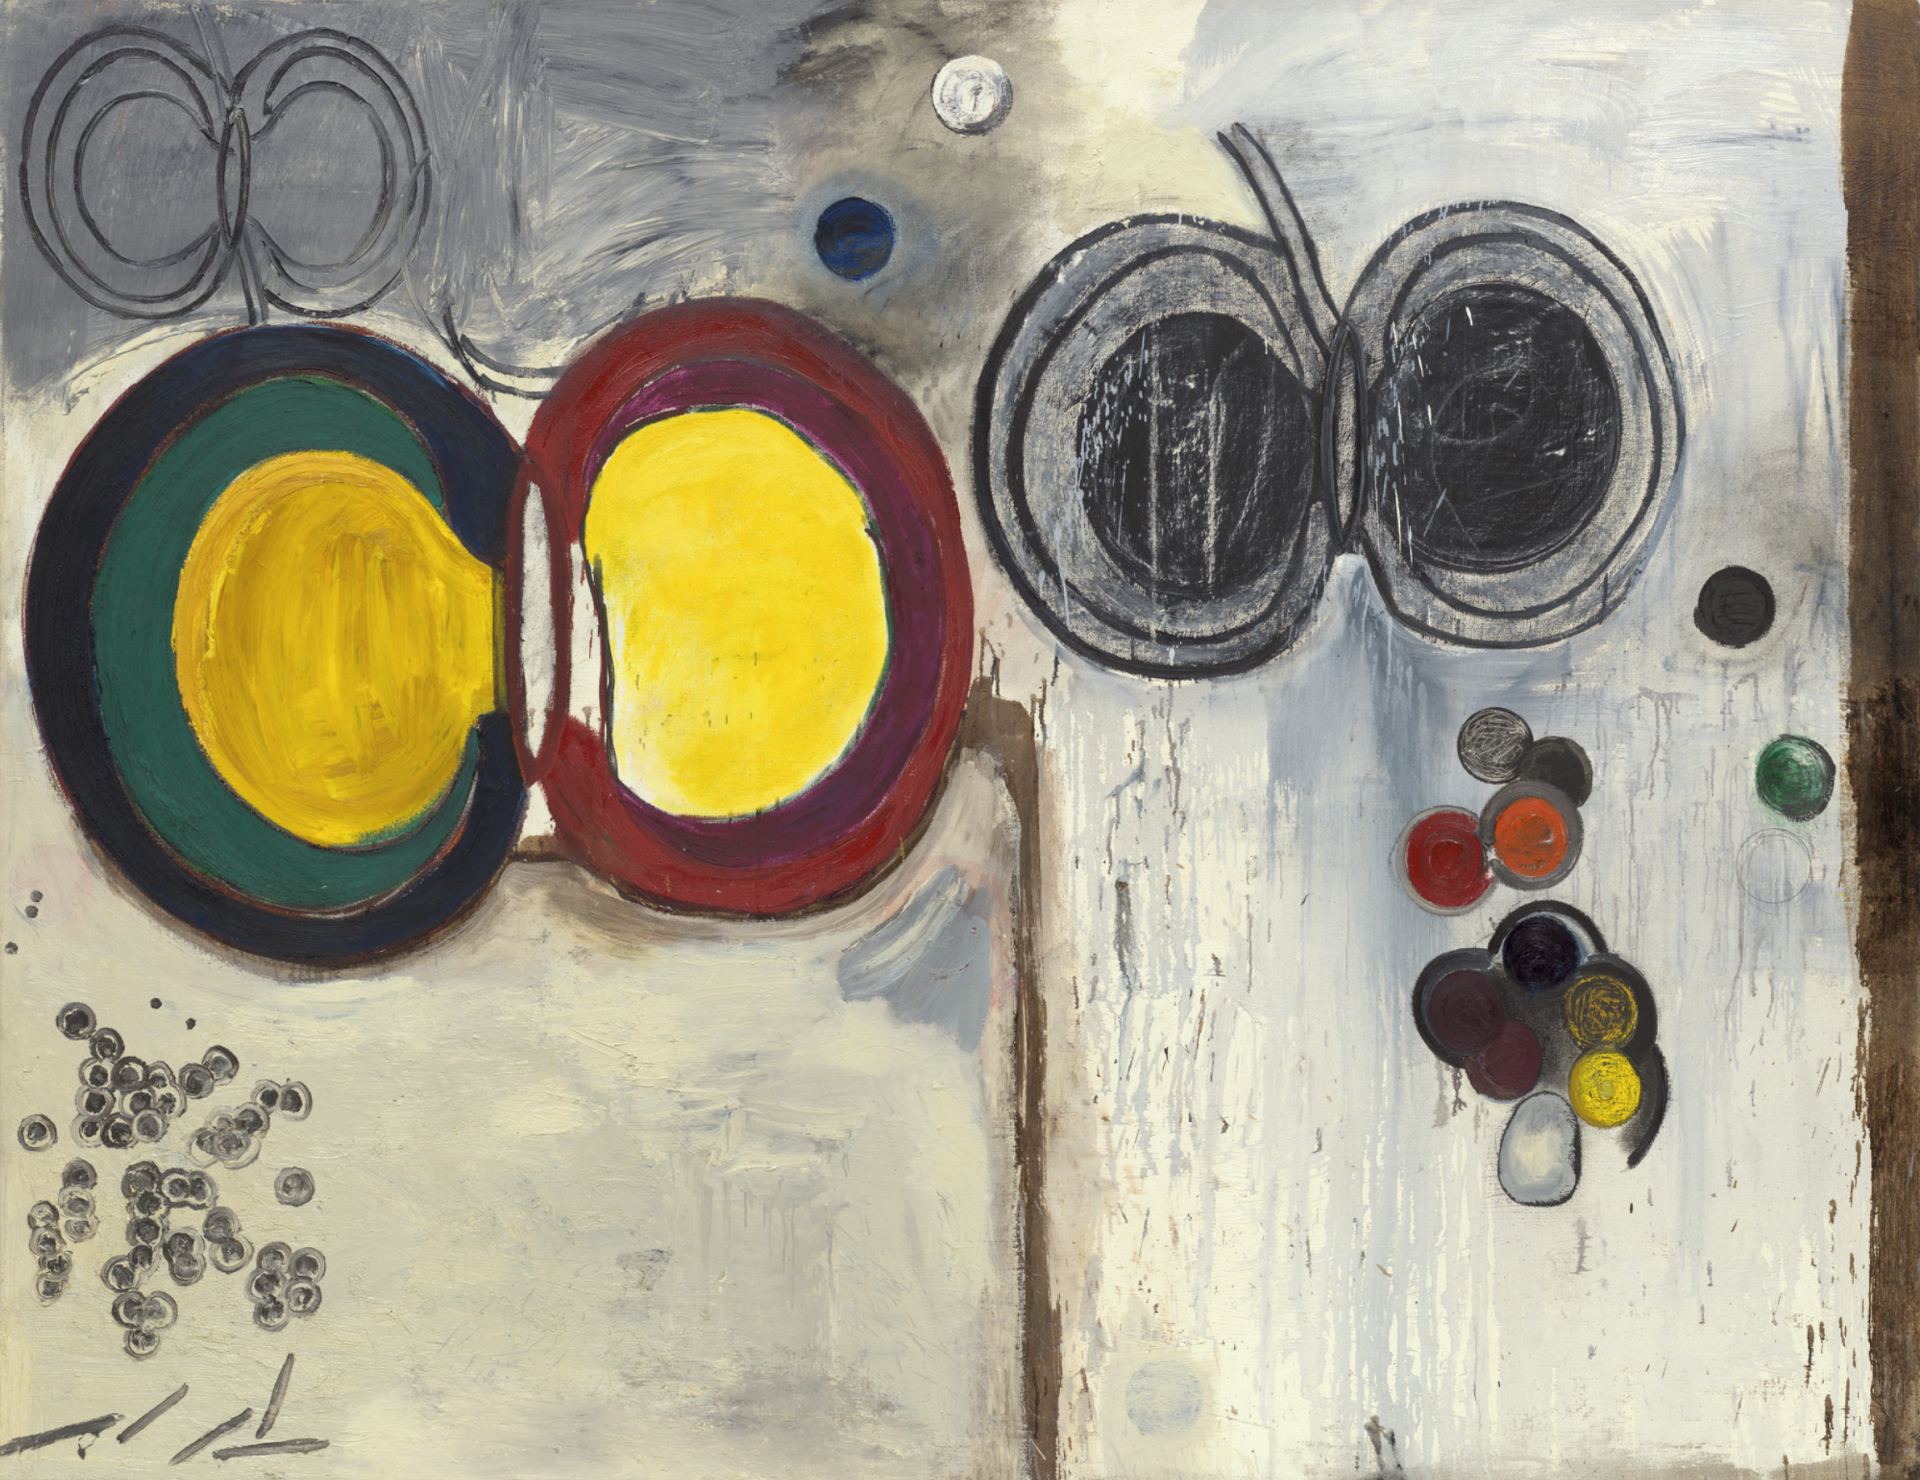 "Conjugation" by Terry Winters, 1986, an abstract painting with a balanced composition featuring circular shapes in various colors on a textured background, suggesting symmetry and connectivity.